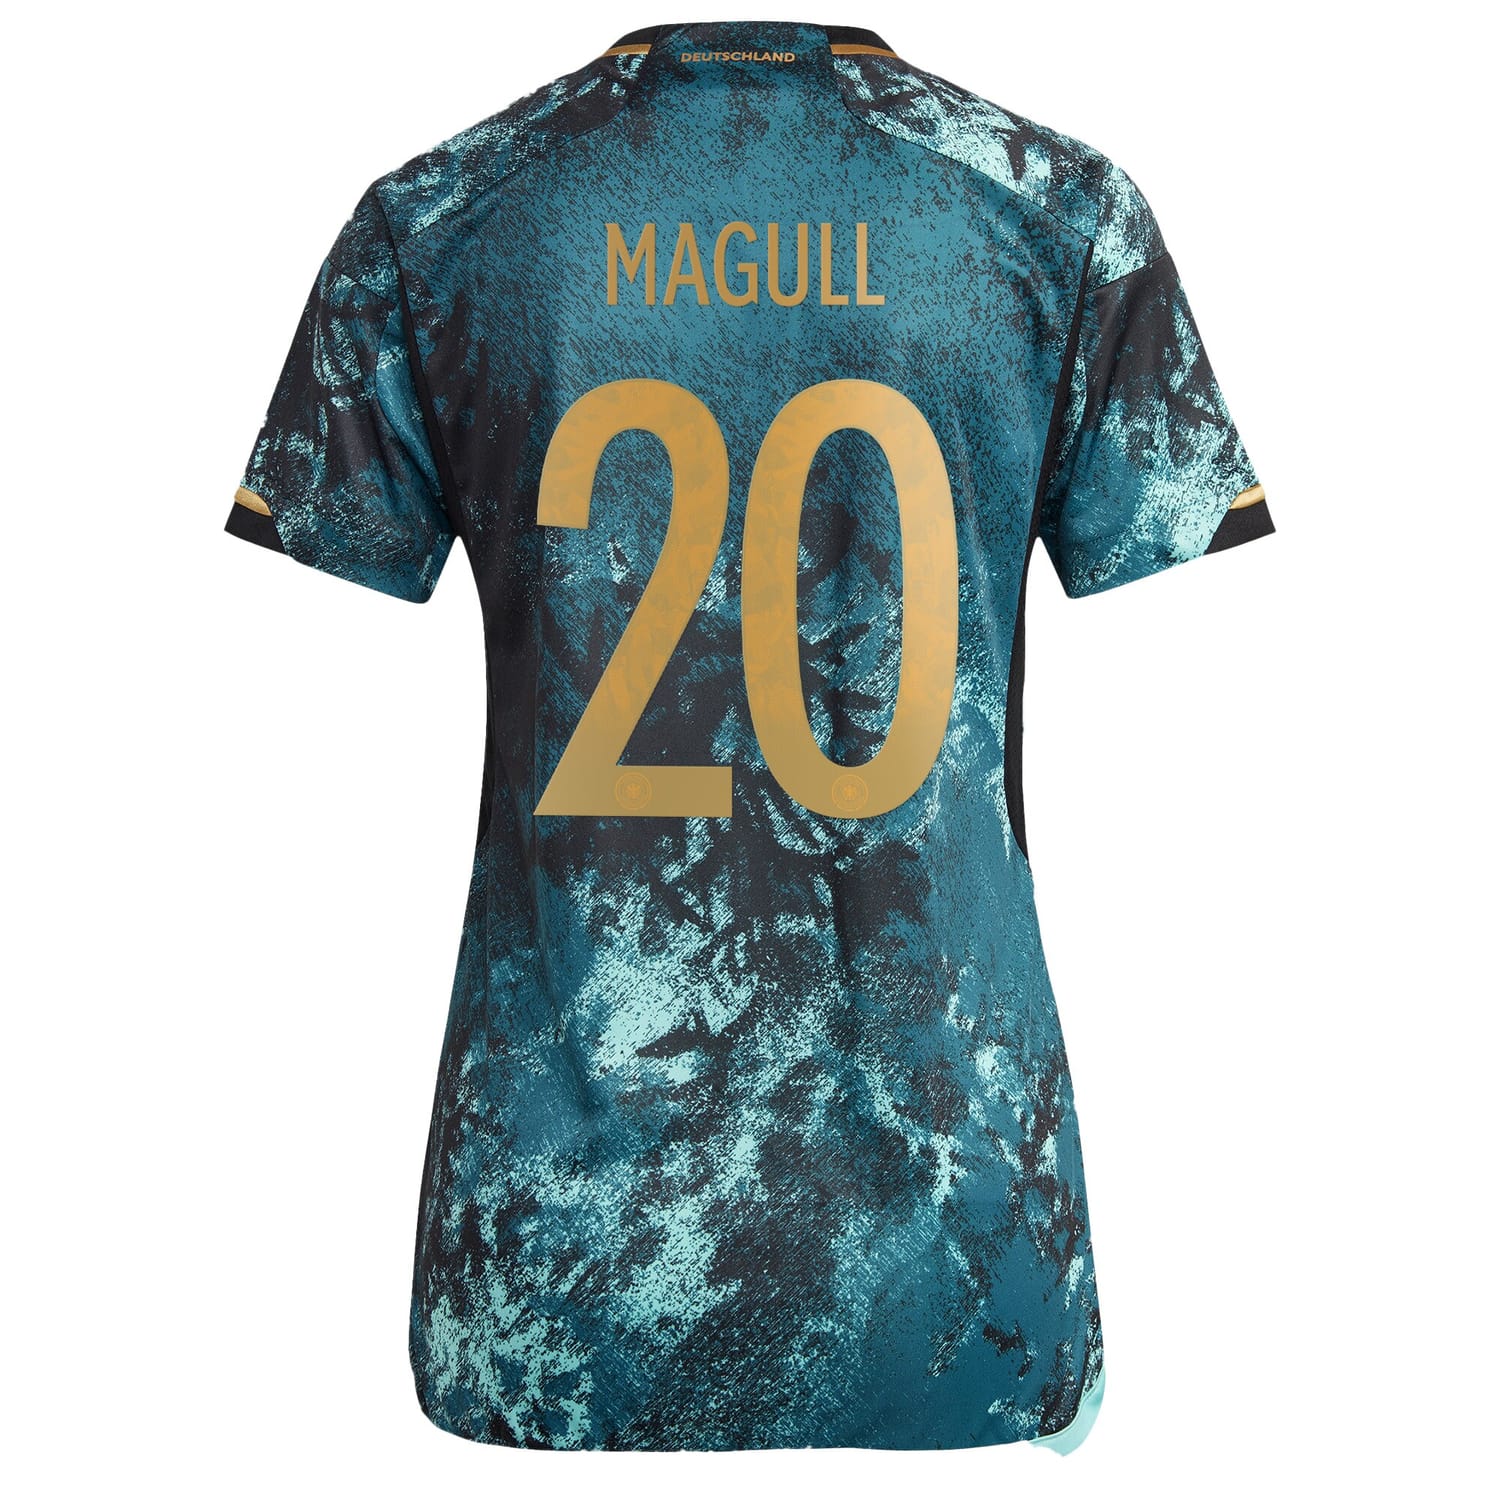 Germany National Team Away Jersey Shirt 2023 player Lina Magull 20 printing for Women